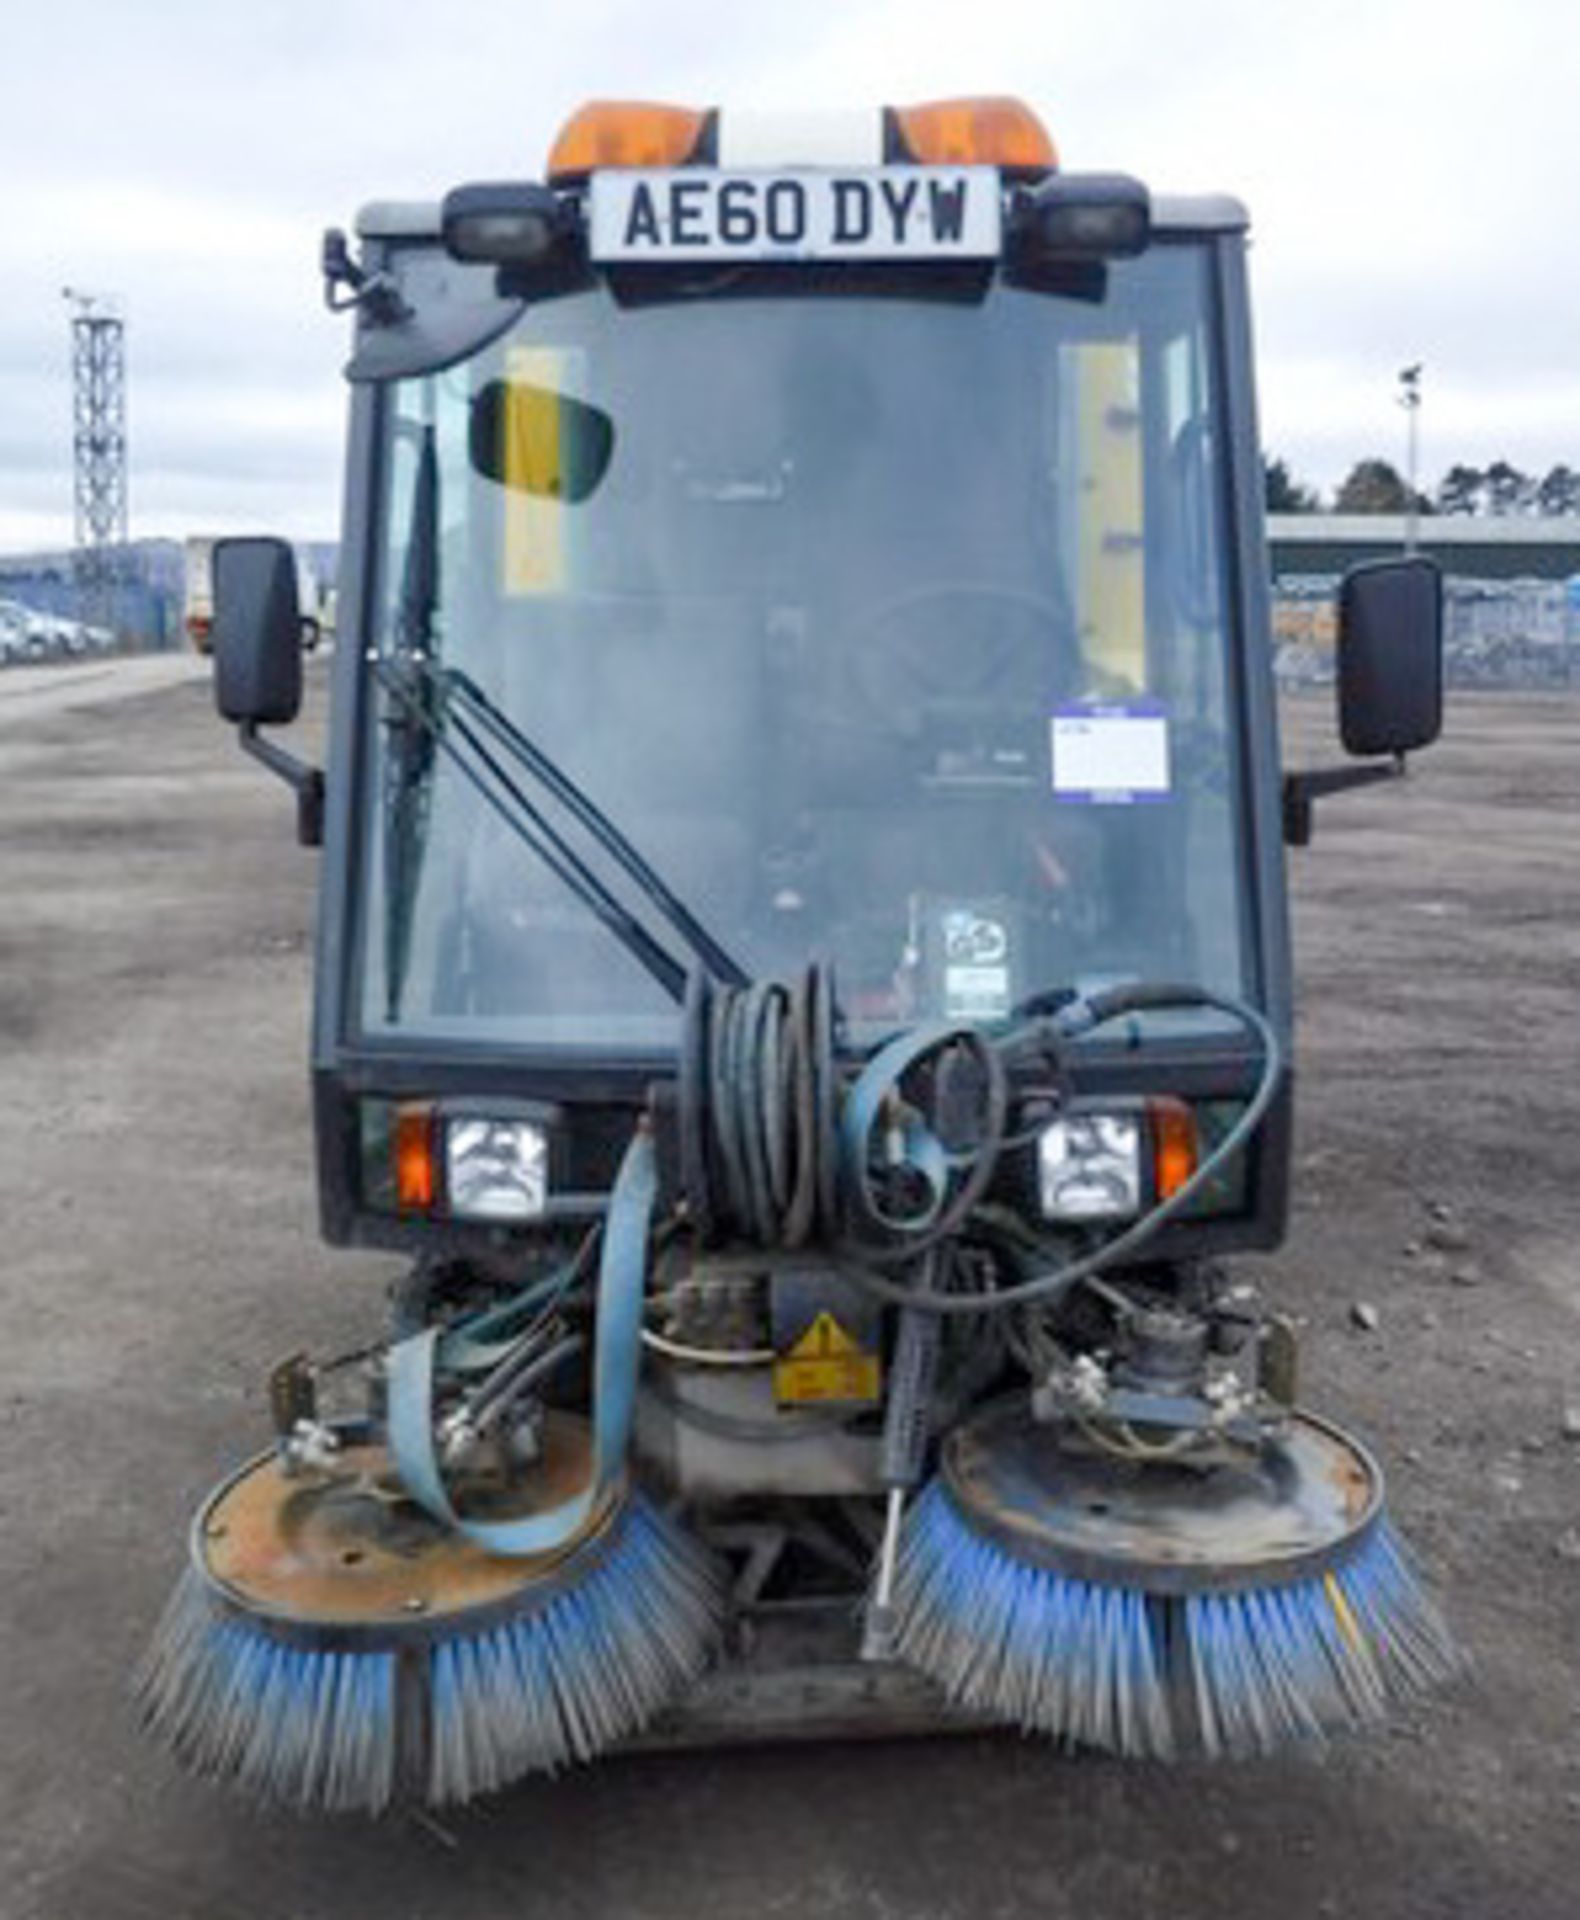 2011 SCHMIDT PRECNCT SWEEPER, REG AE60 DYW, 2 AXLES. DOCUMENTS IN OFFICE. - Image 2 of 15